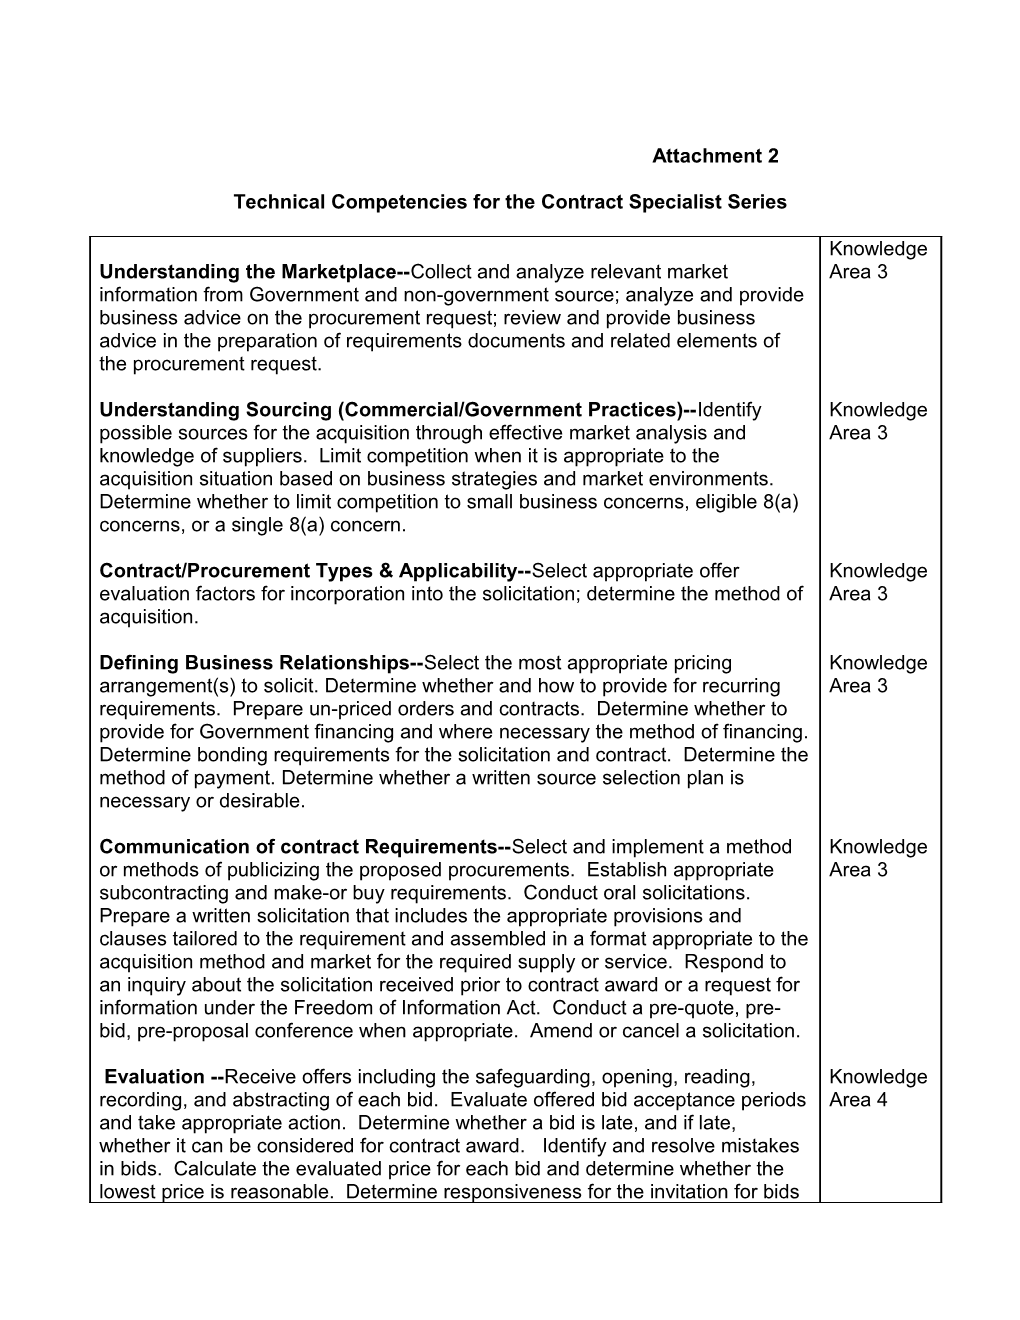 Table 1: Technical Competencies For The Contract Specialist Series